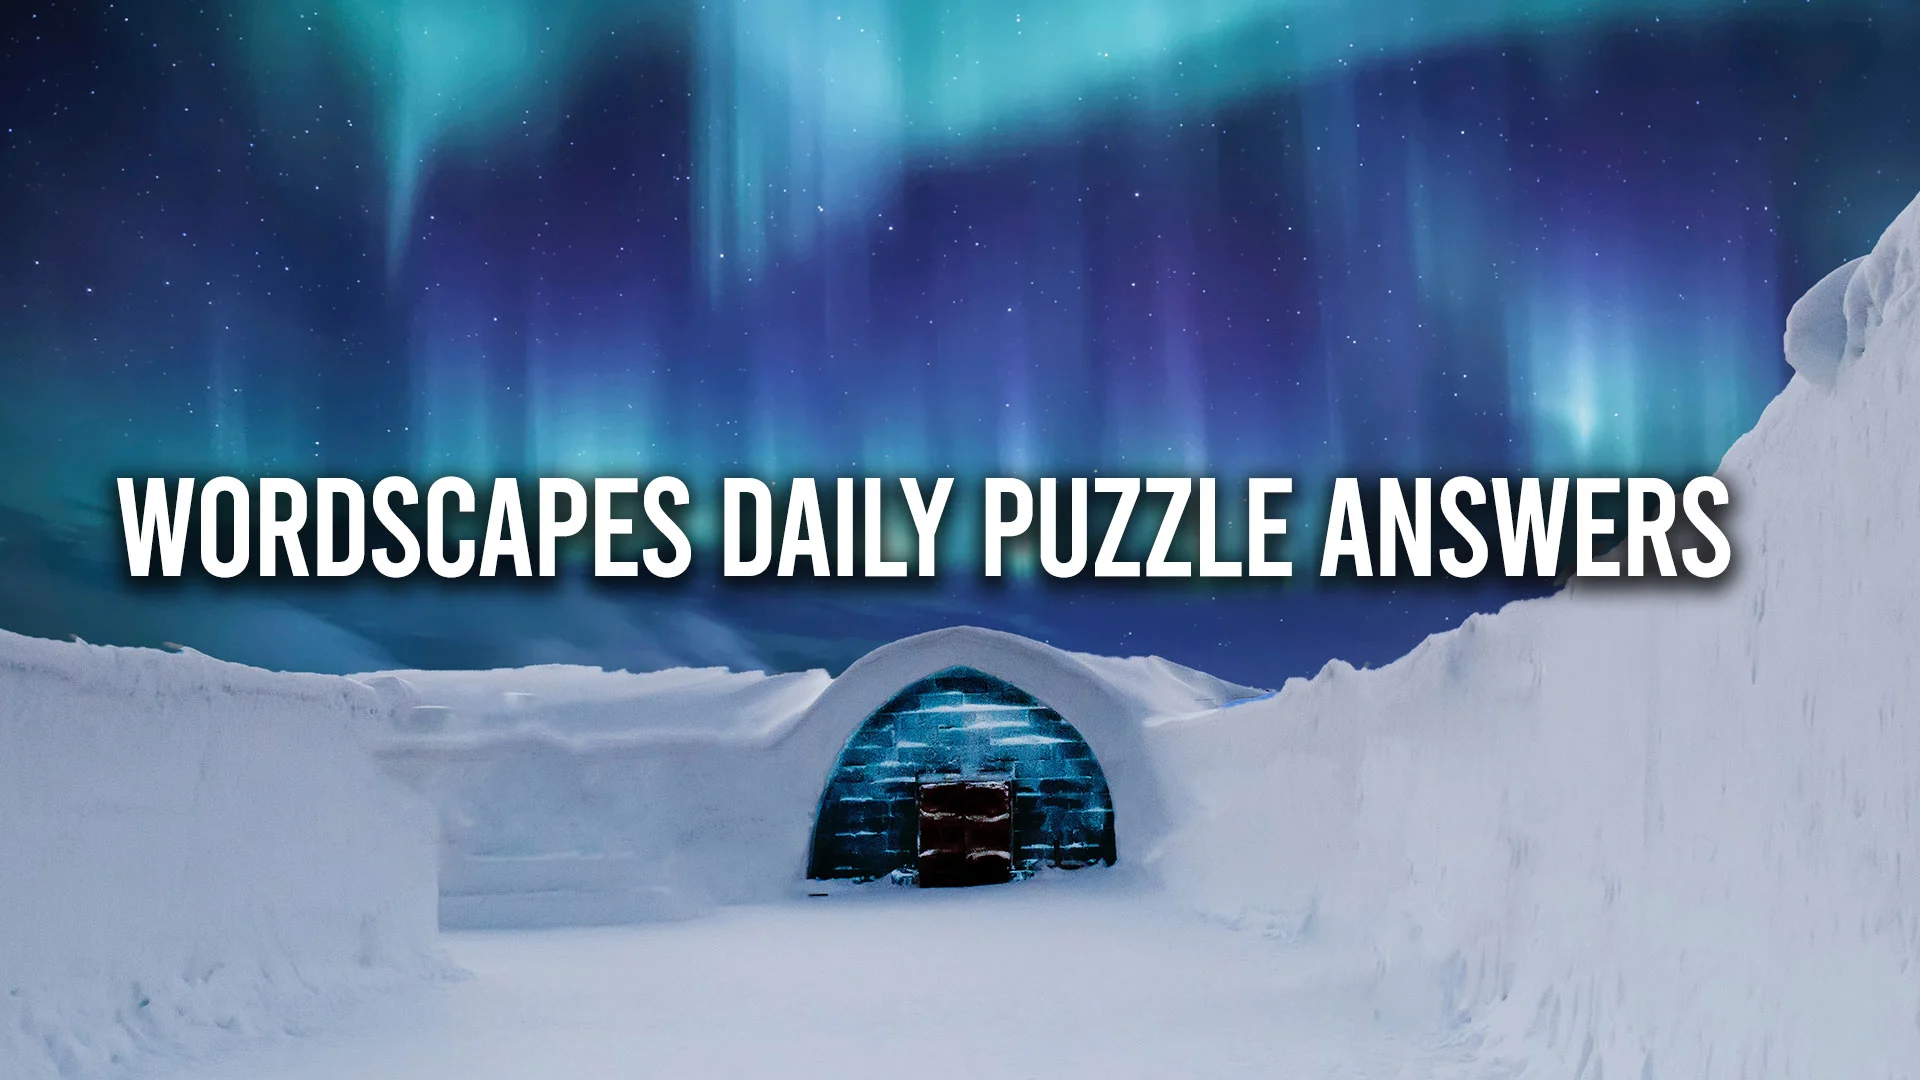 Wordscapes Daily Puzzle Answers for March 19 2023